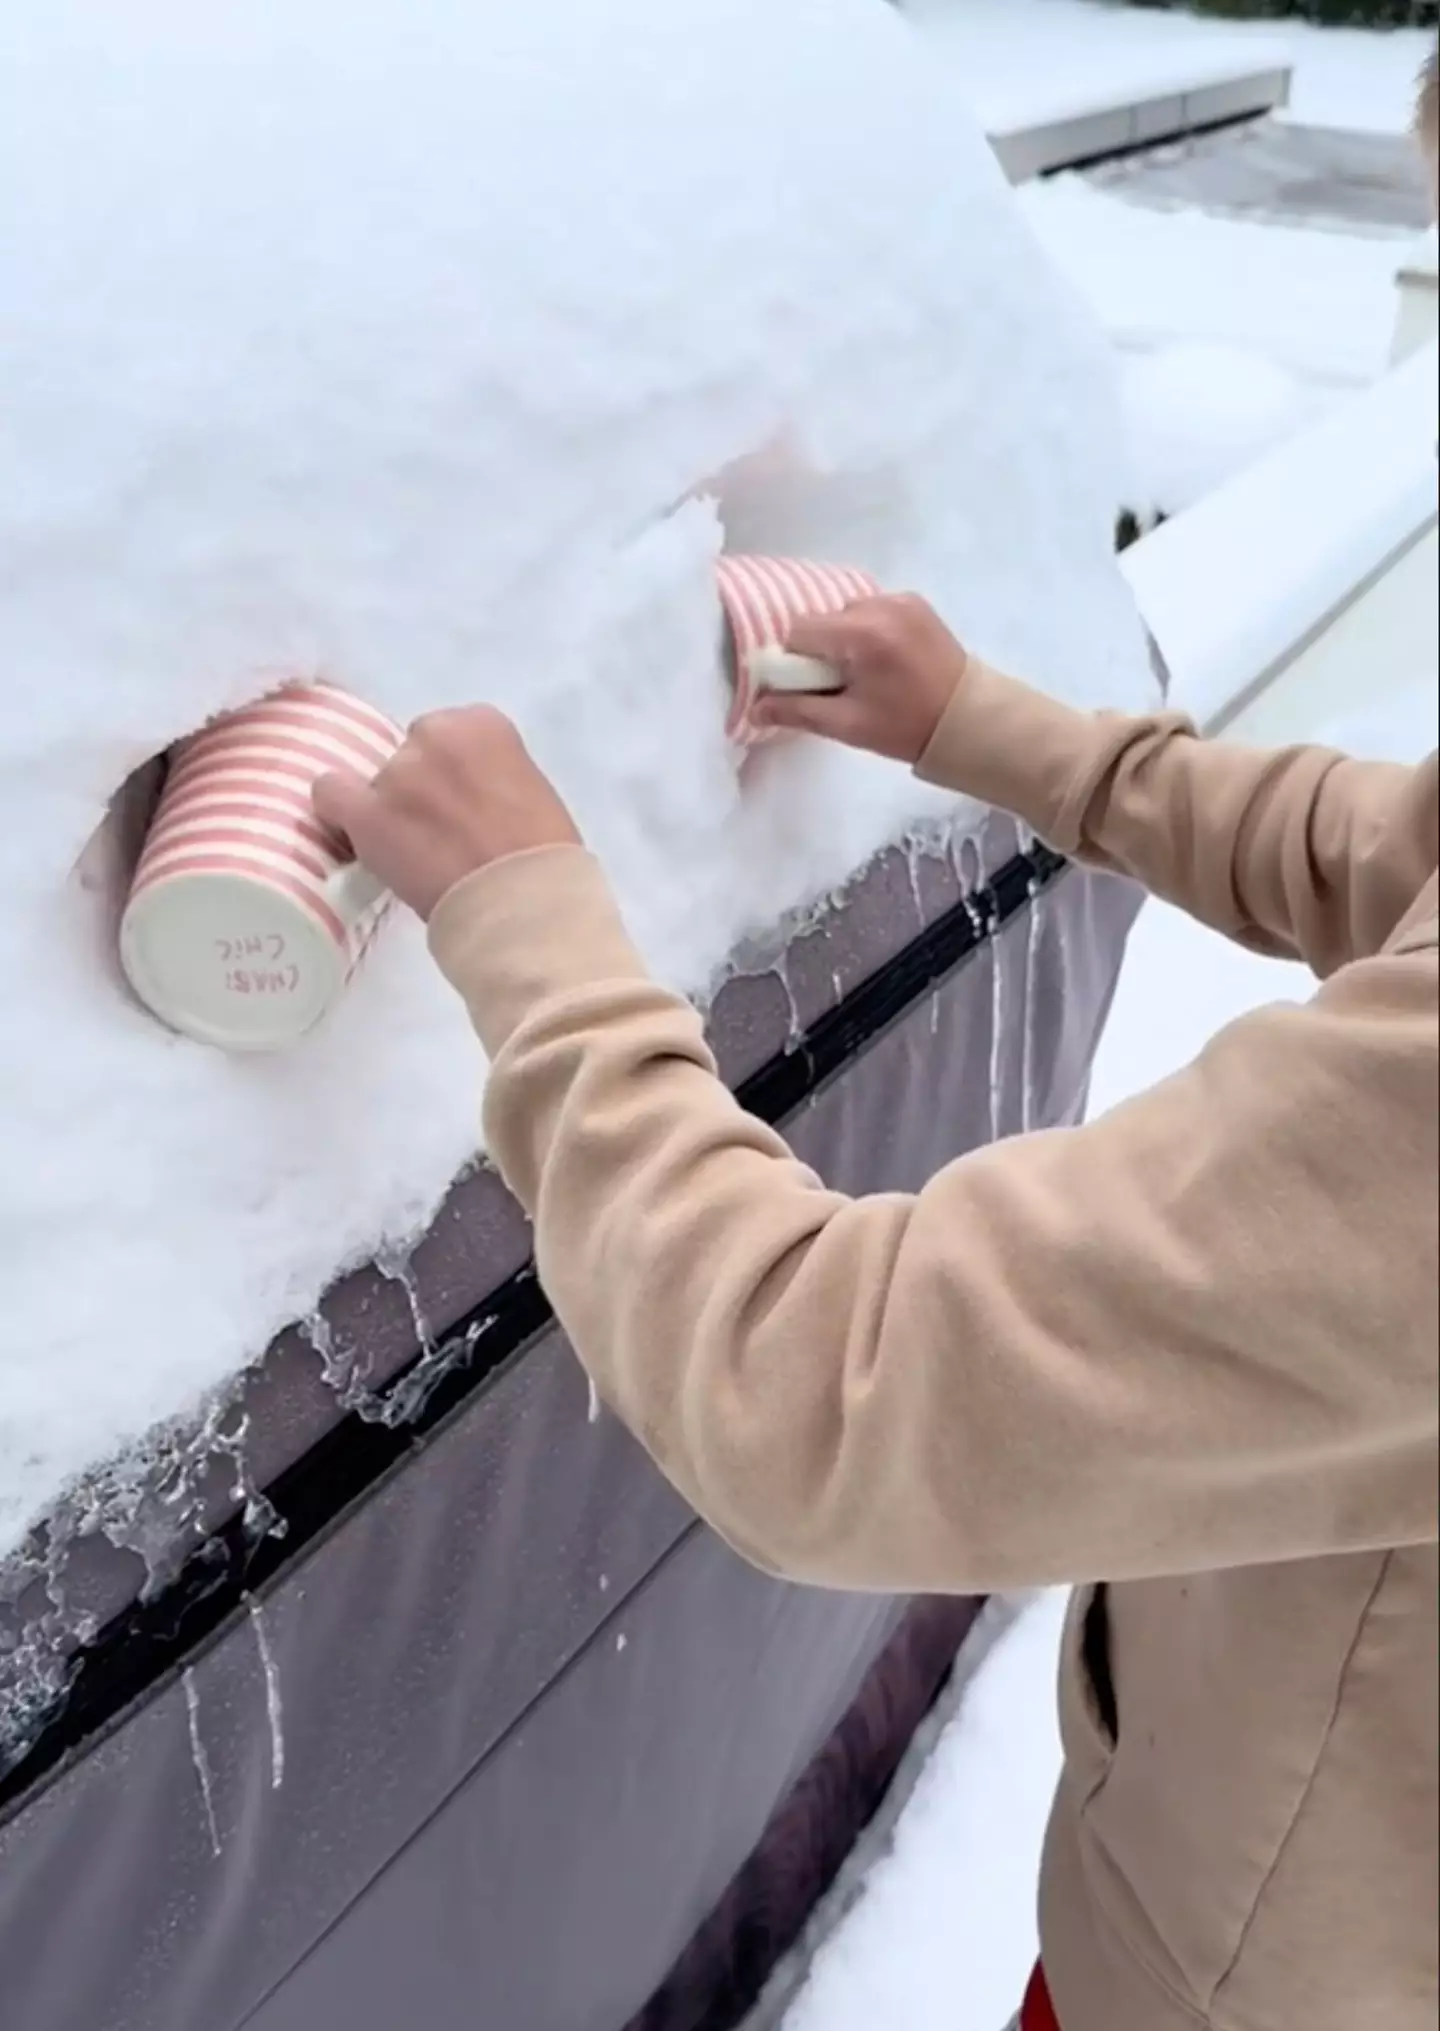 People were stunned by where Reese Witherspoon grabbed her snow from.